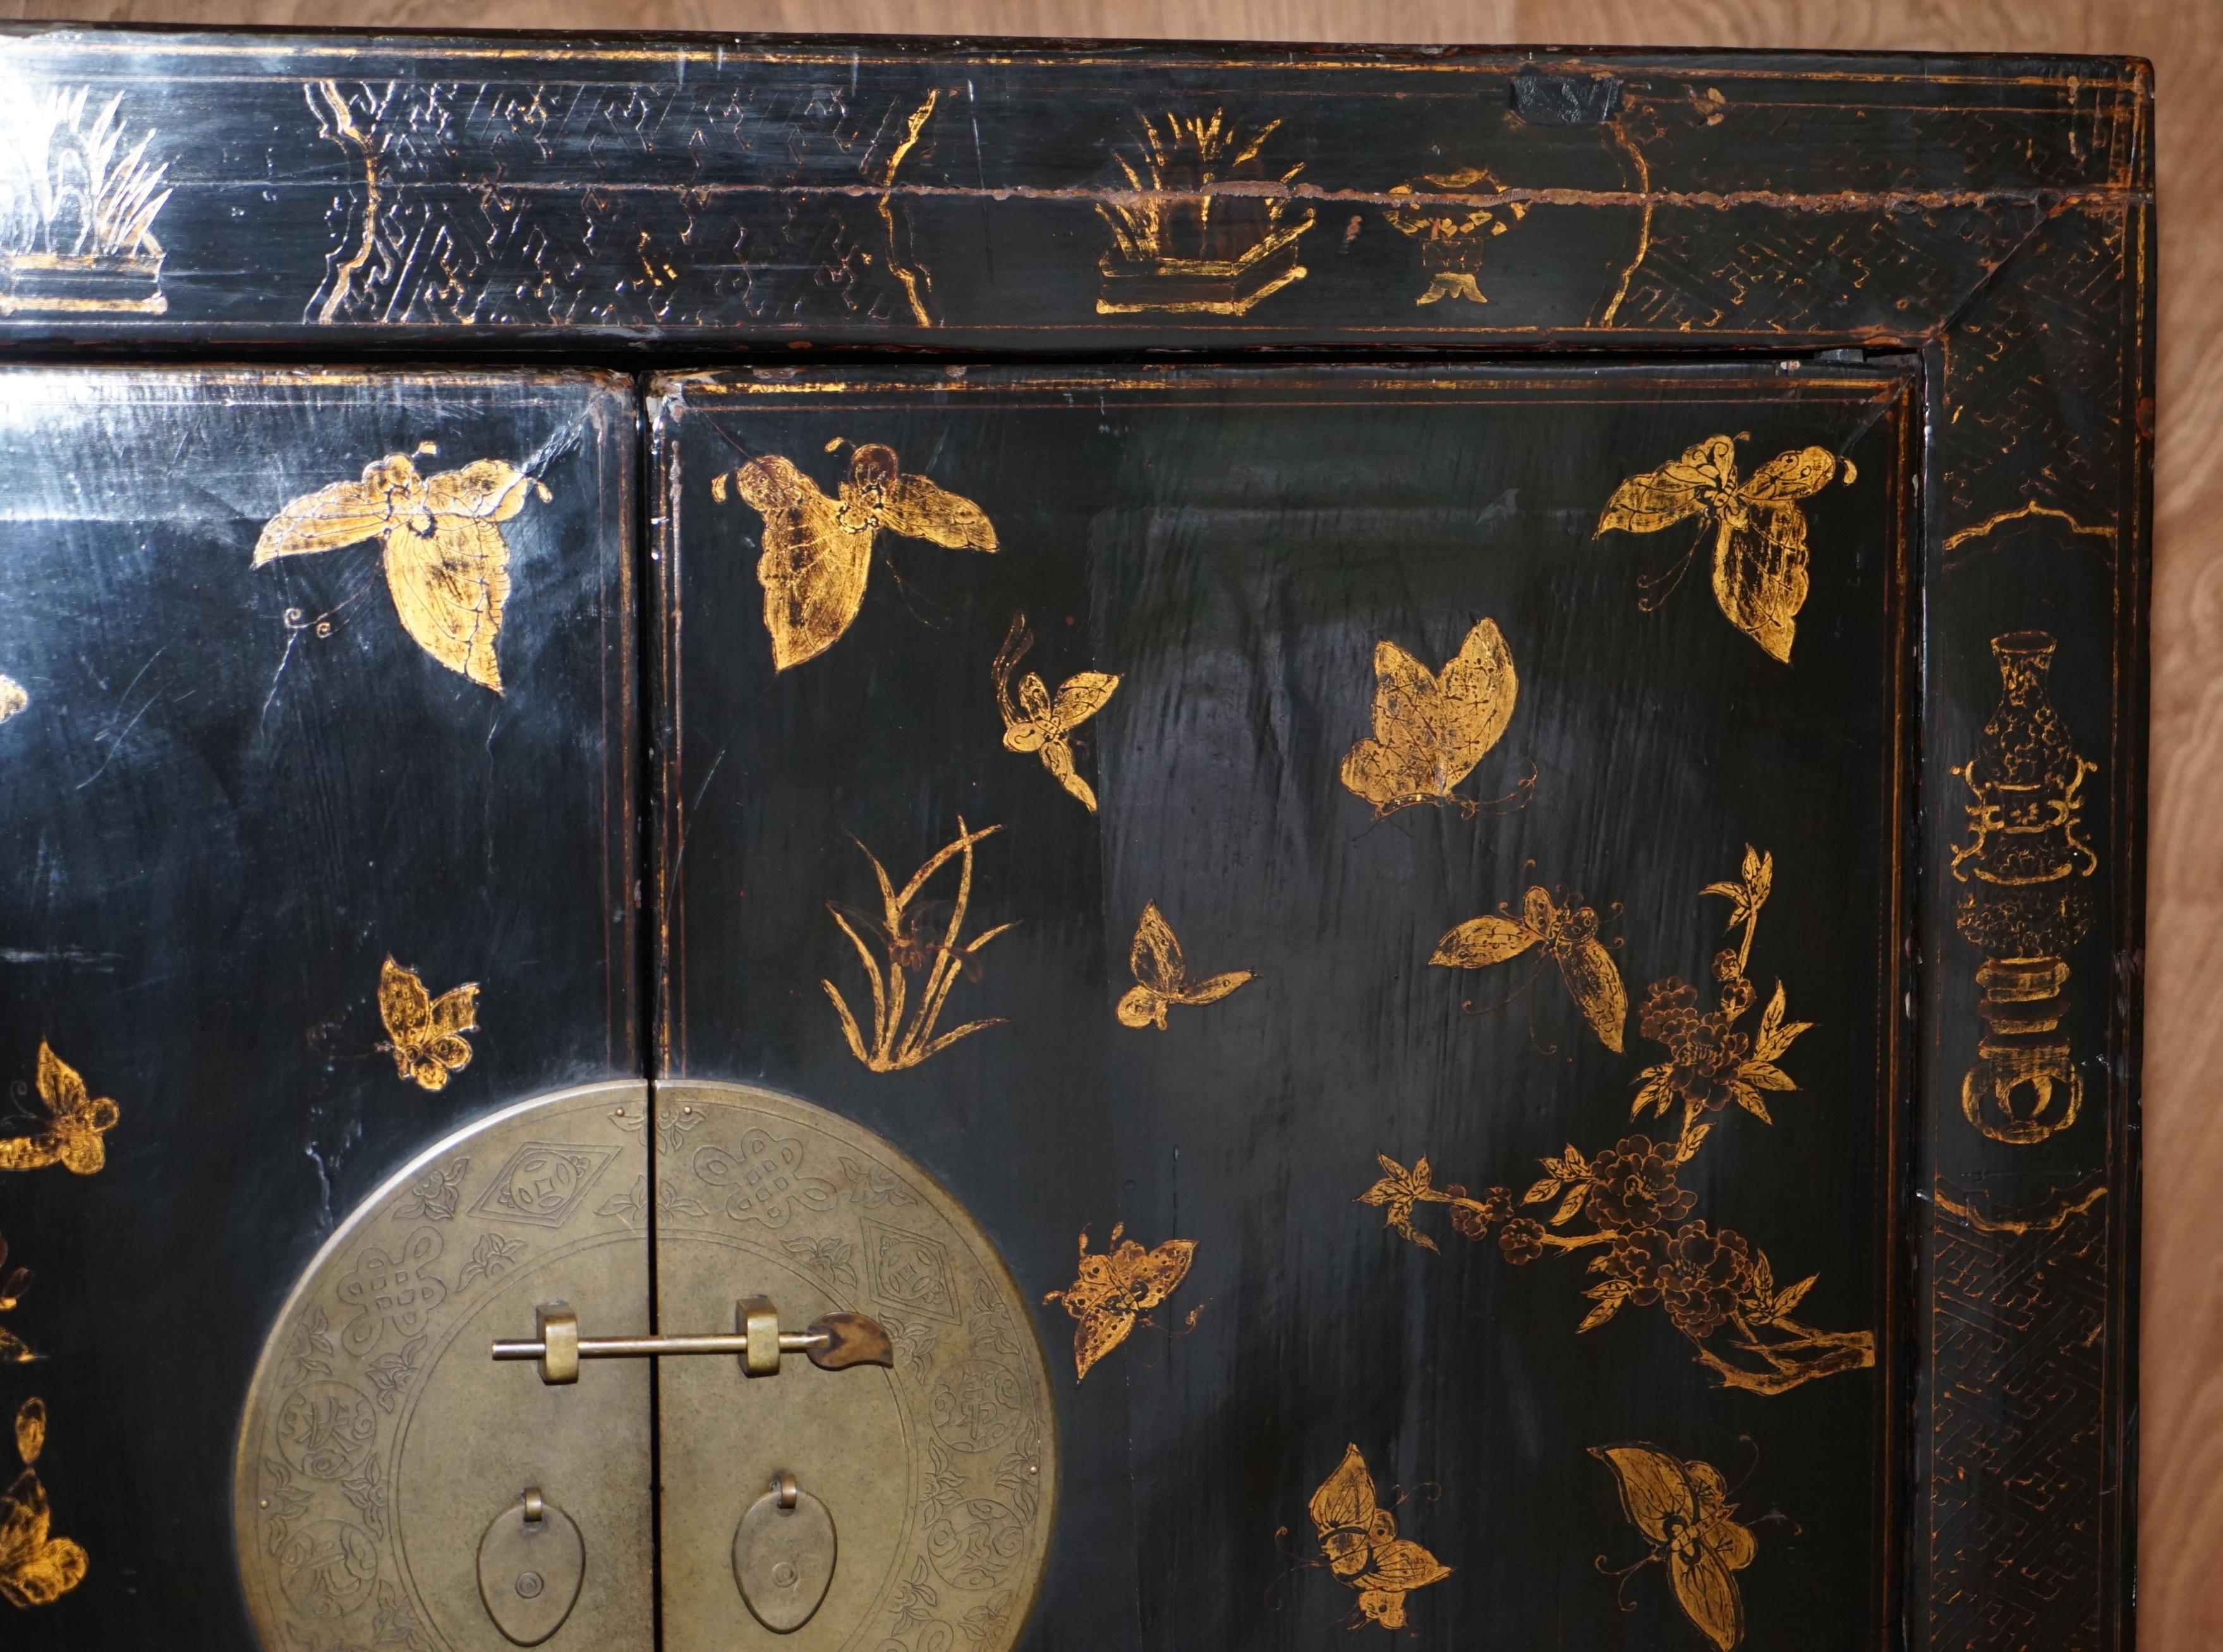 Late 19th Century Antique Chinese Hand Painted Gold Left Wedding Cabinet for Folded Linens Etc